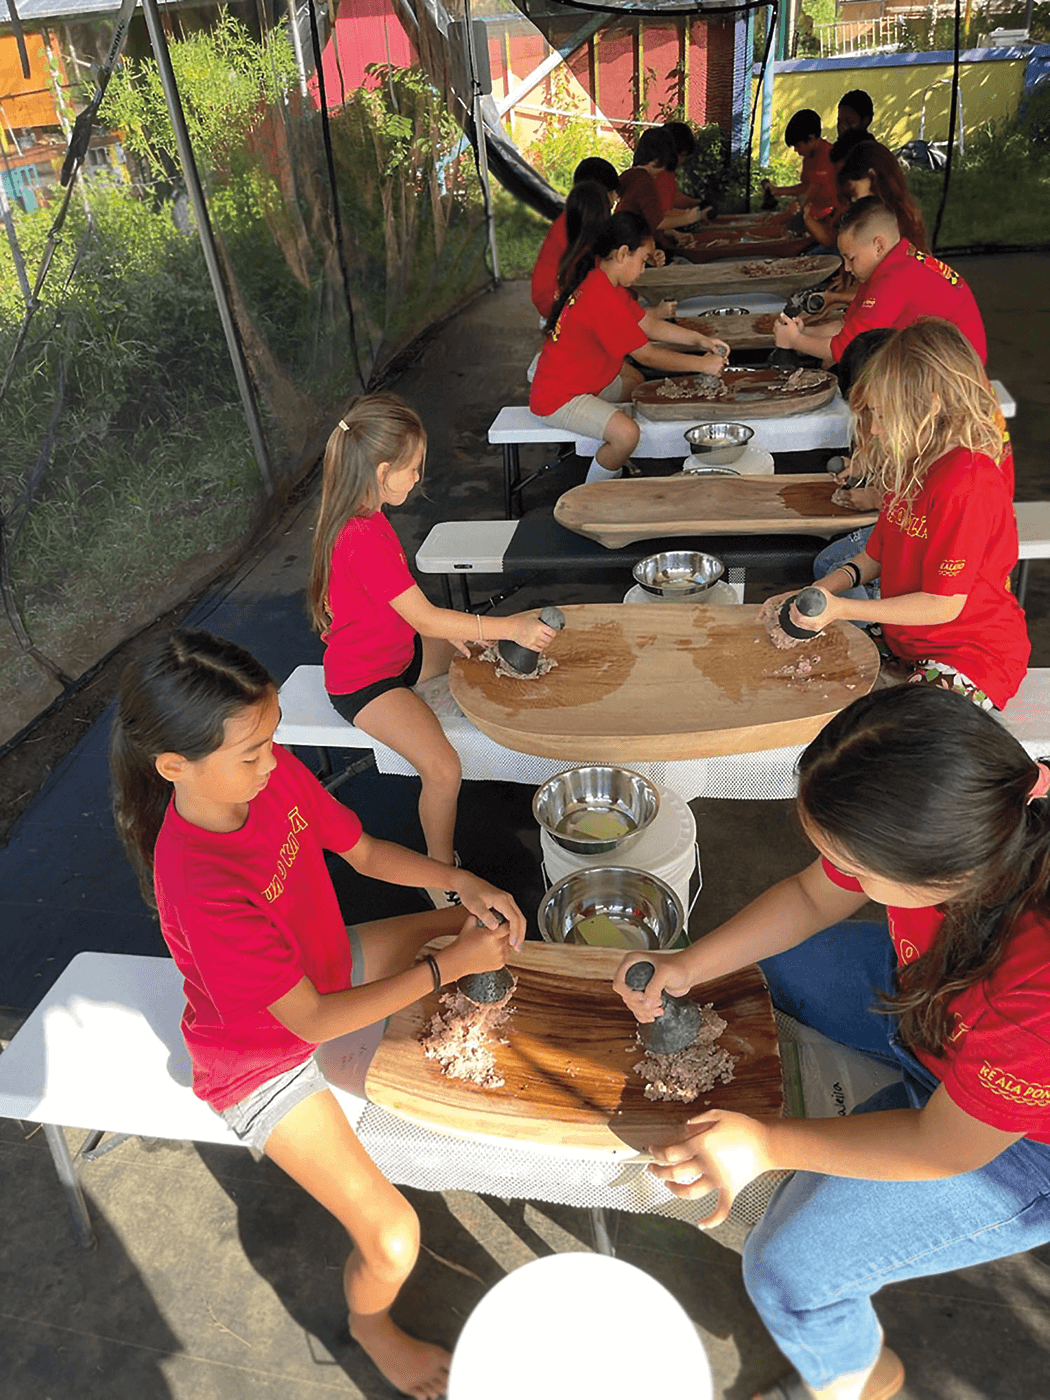 Charter students learn to make poi, the traditional staple food of Hawaii made from the taro plant. Poi is cooked, mashed, and fermented to taste.